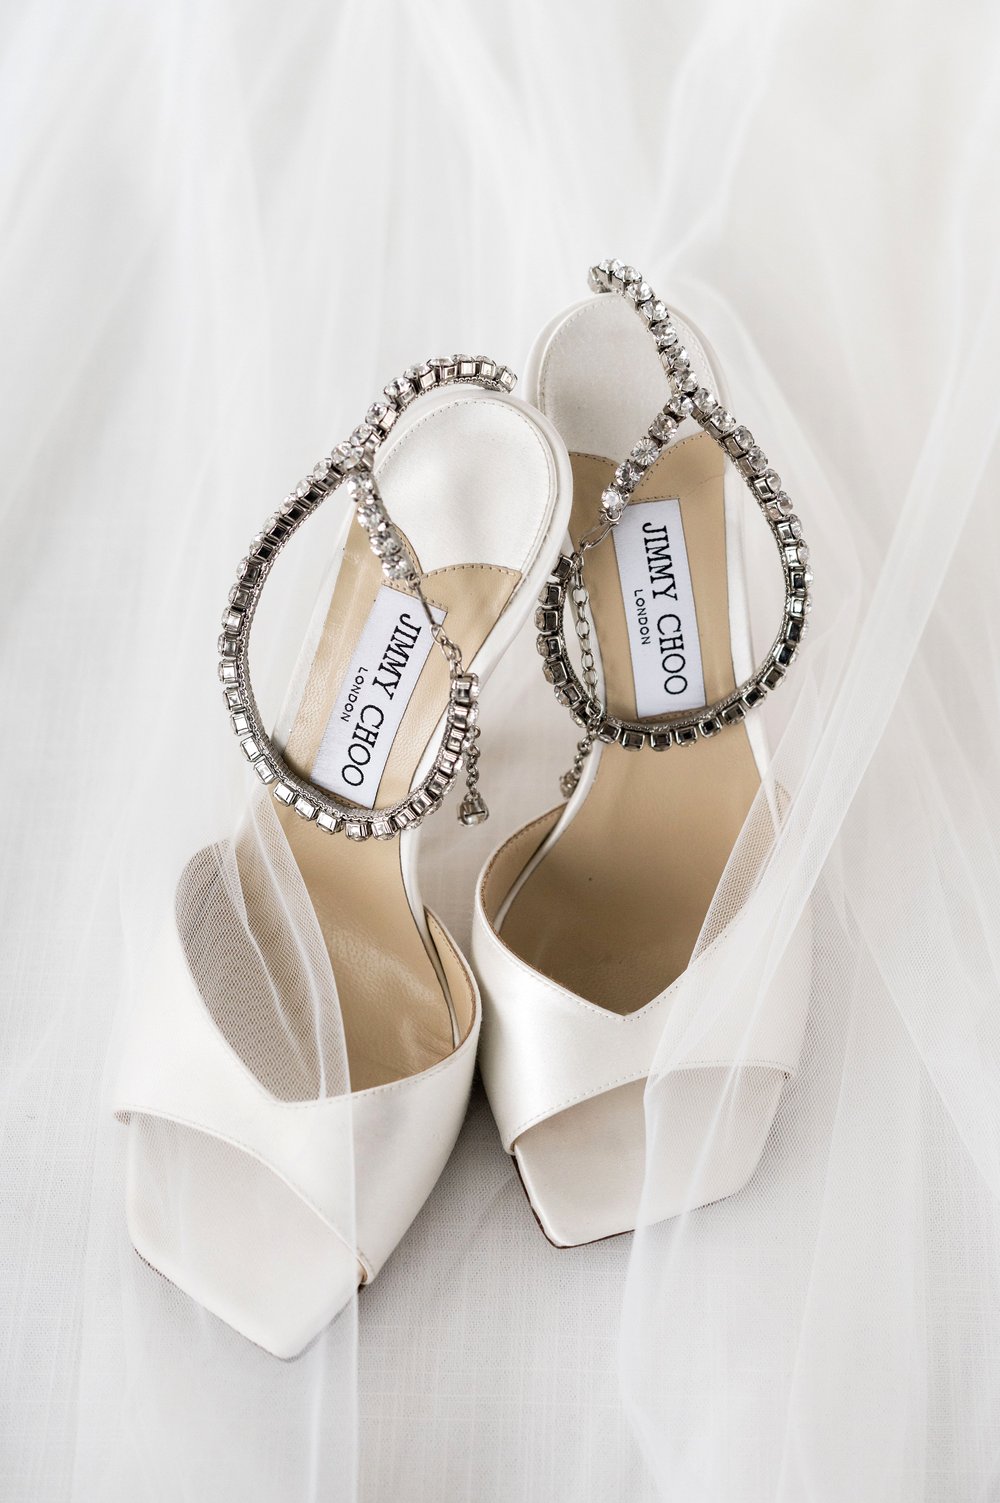 wedding shoes on top of a veil